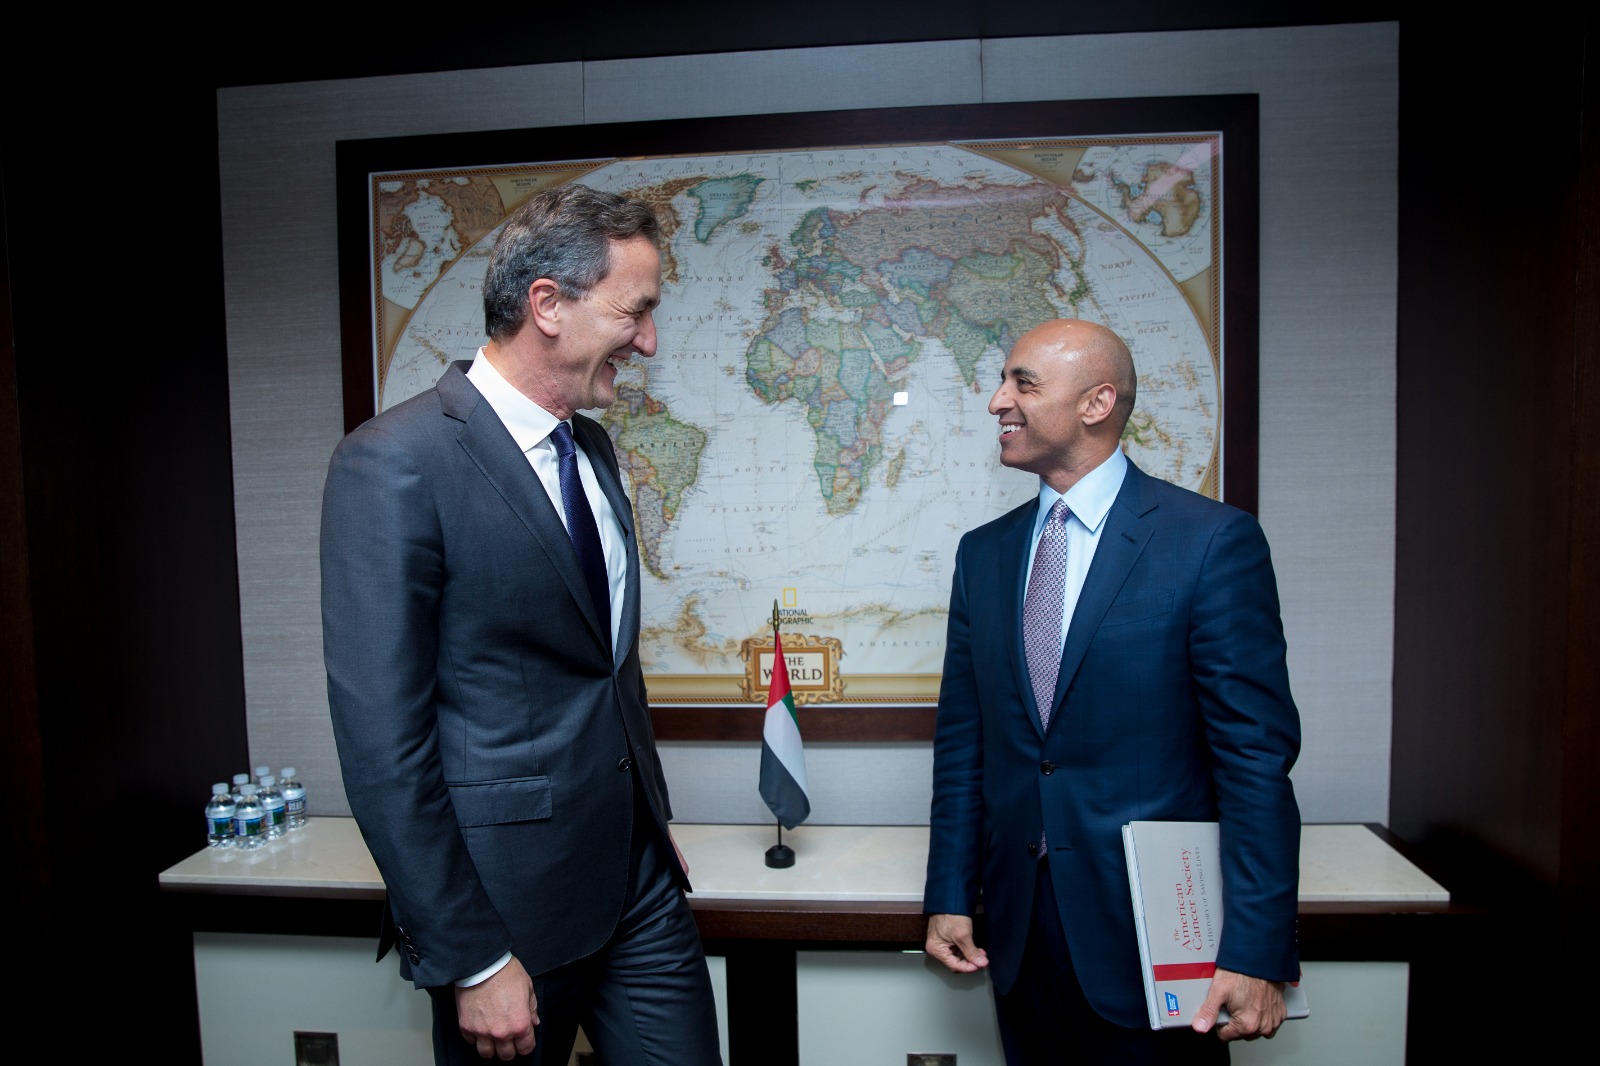 Yousef Al Otaiba and Cleveland Clinic CEO and President Dr. Tomislav Mihaljevic